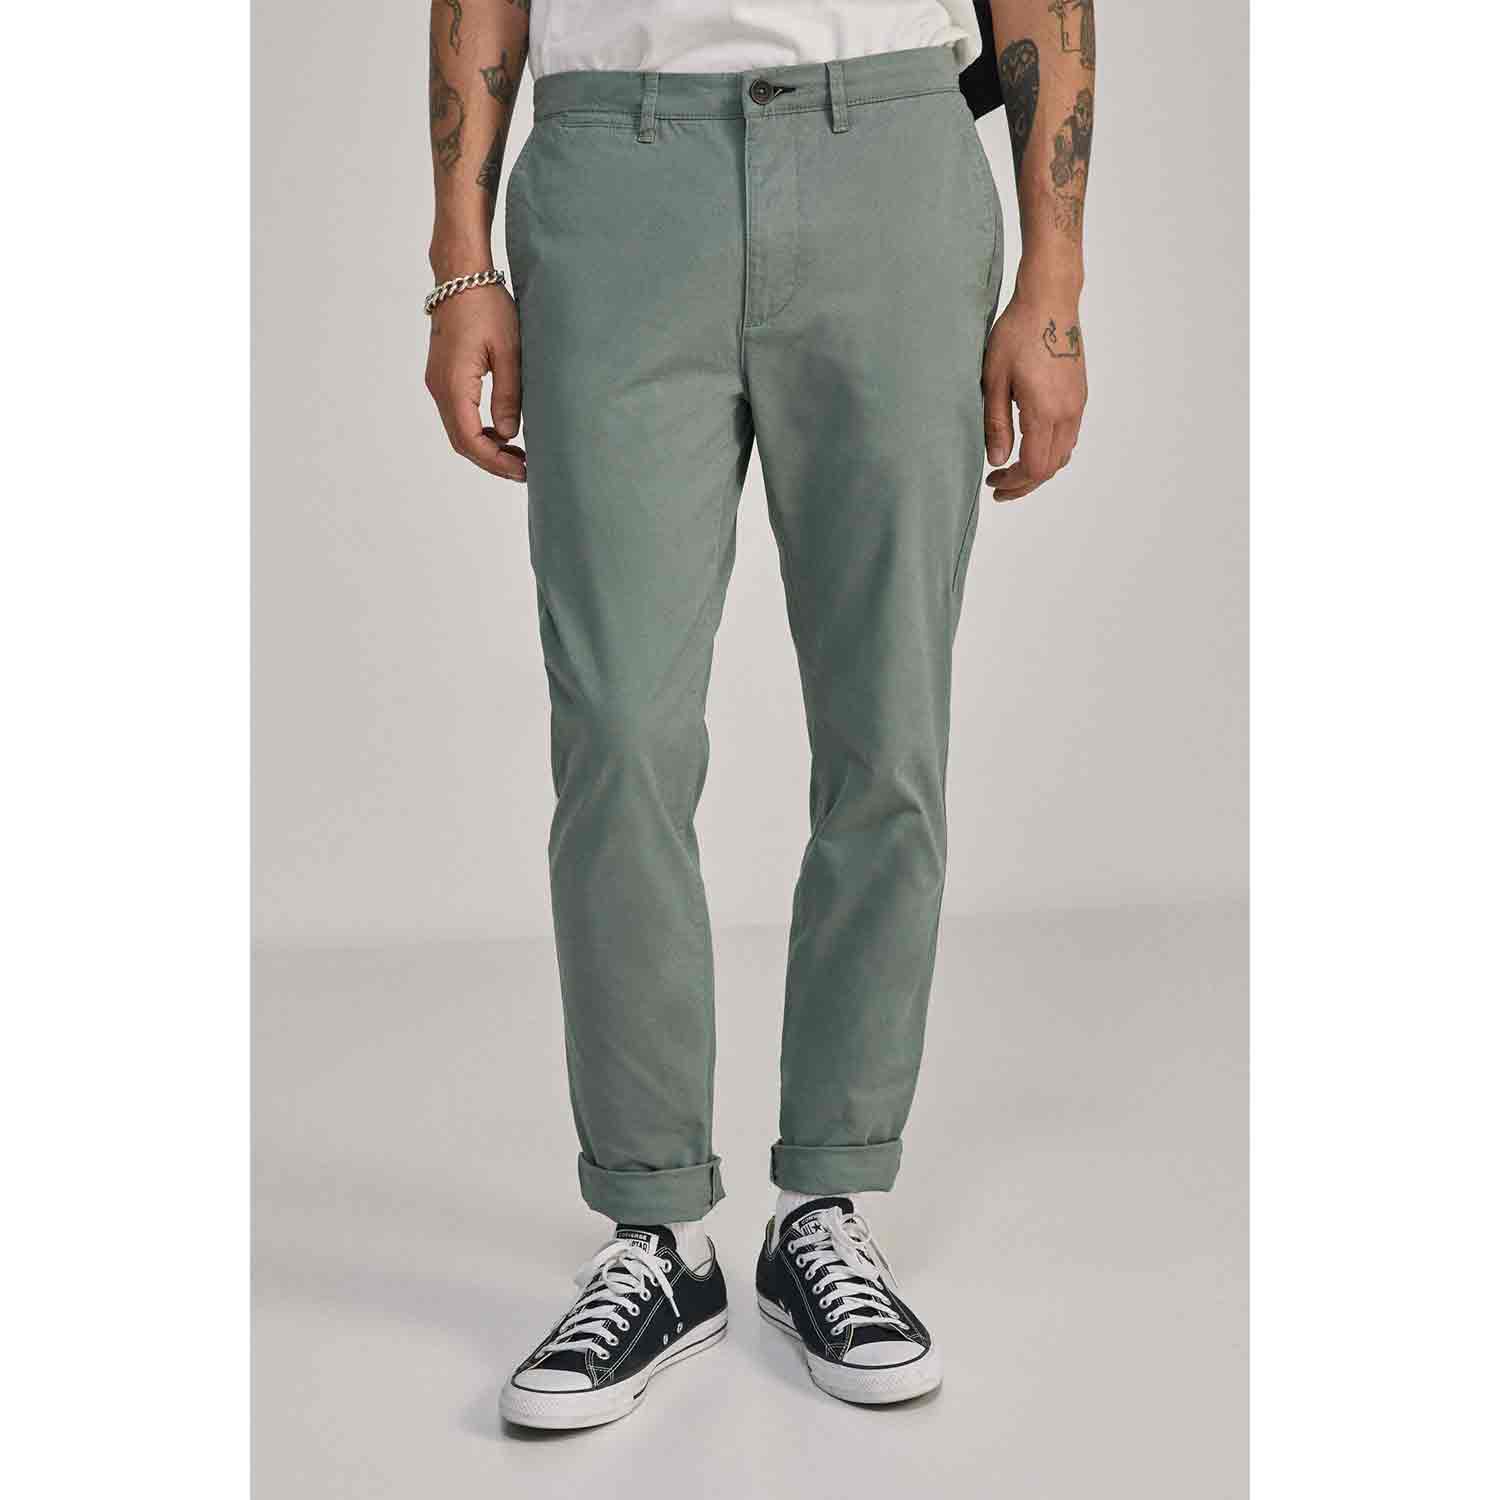 Springfield Skinny Patterned Chino - Green 1 Shaws Department Stores